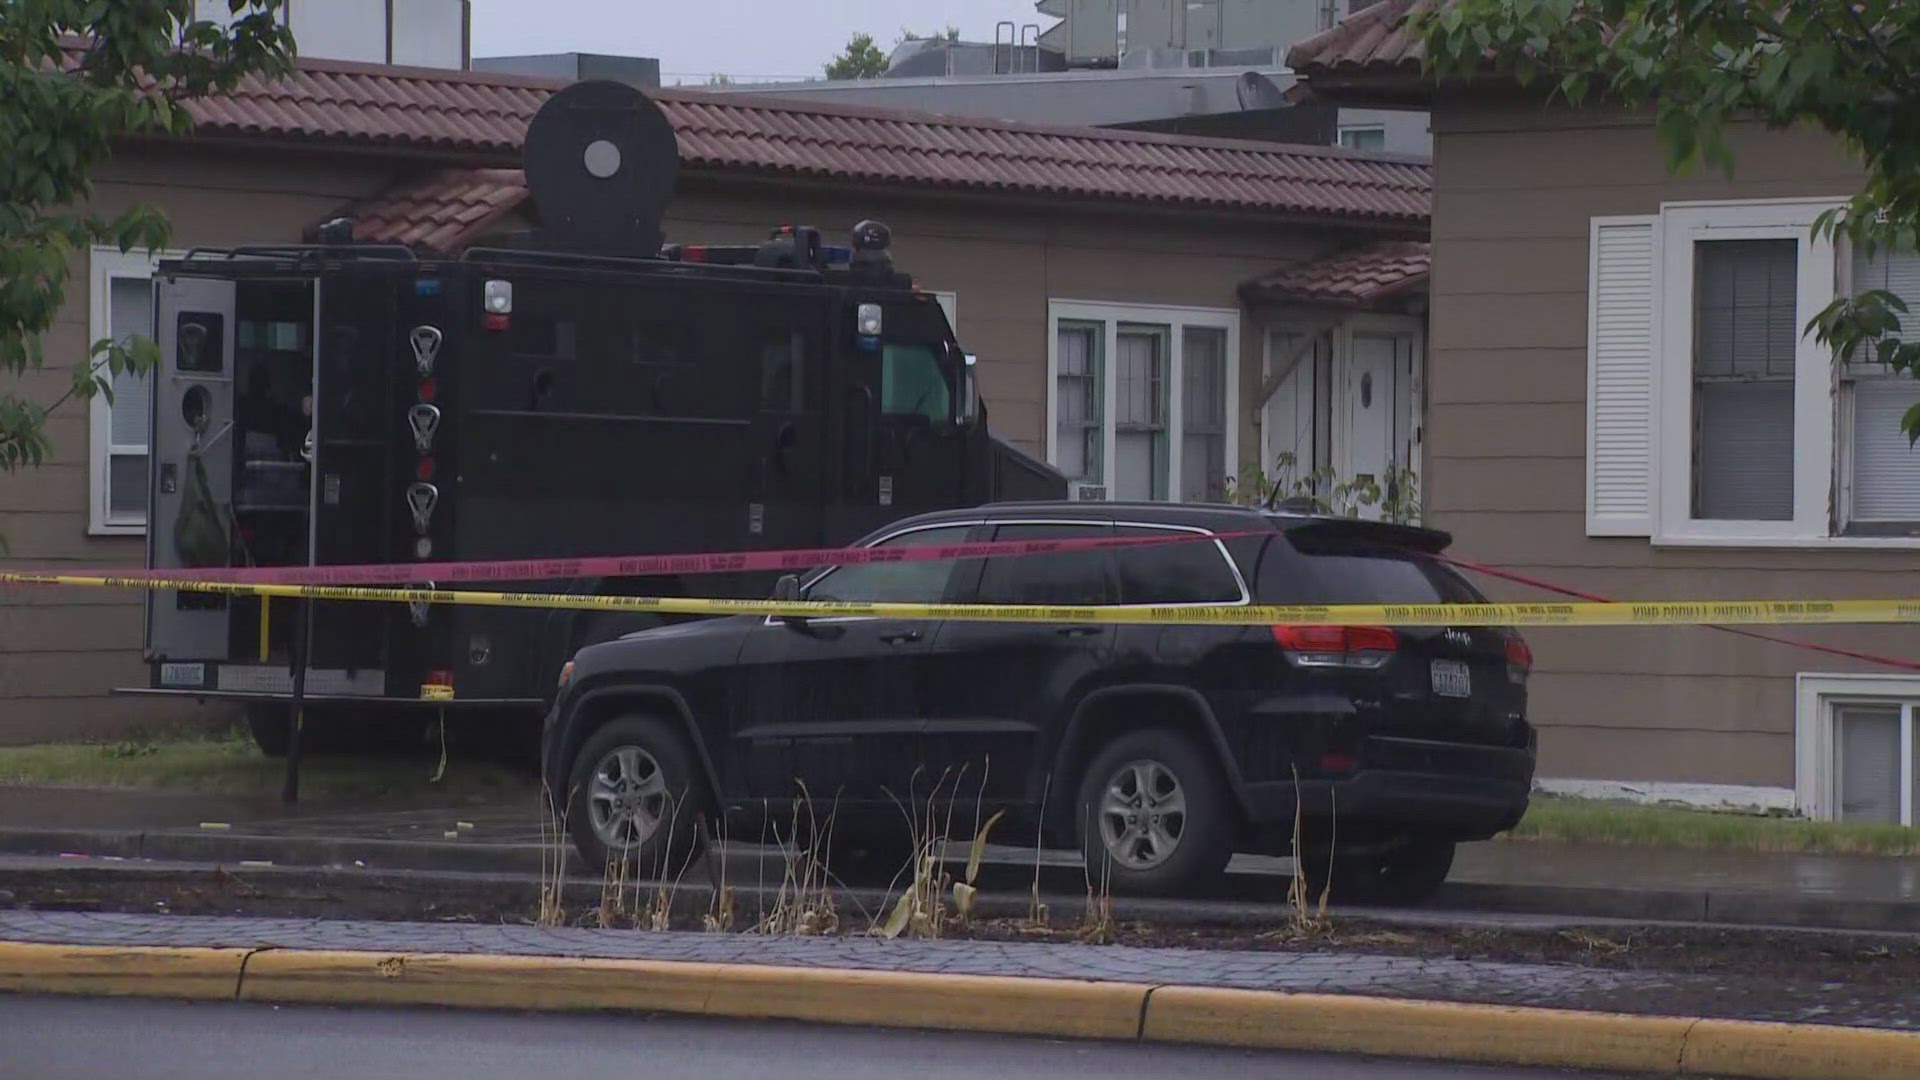 Auburn police officers and the King County Sheriff's Office SWAT team had responded to serve a "high-risk" eviction order when the shooting happened.